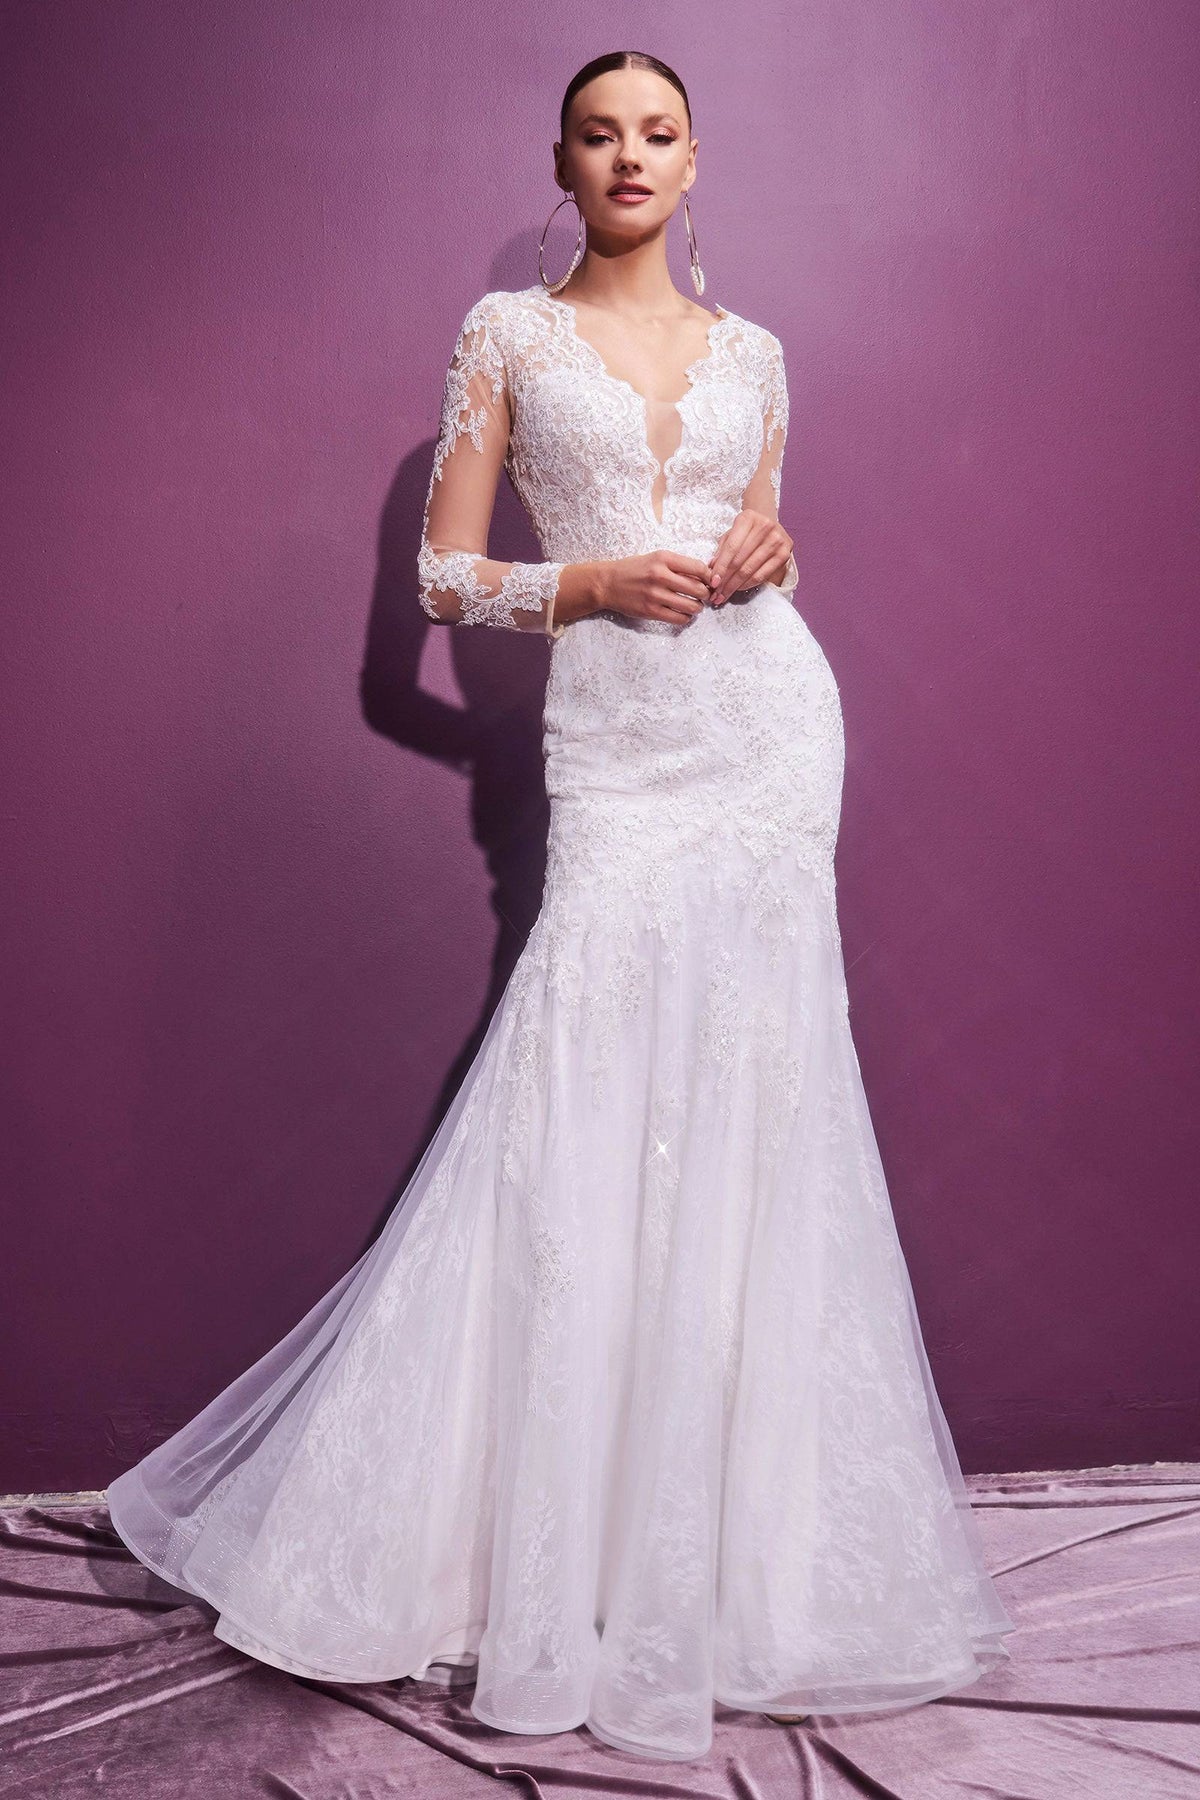 Elegant Lace Long Sleeve Wedding Gown with Deep Neckline #CDCD951W - NORMA REED